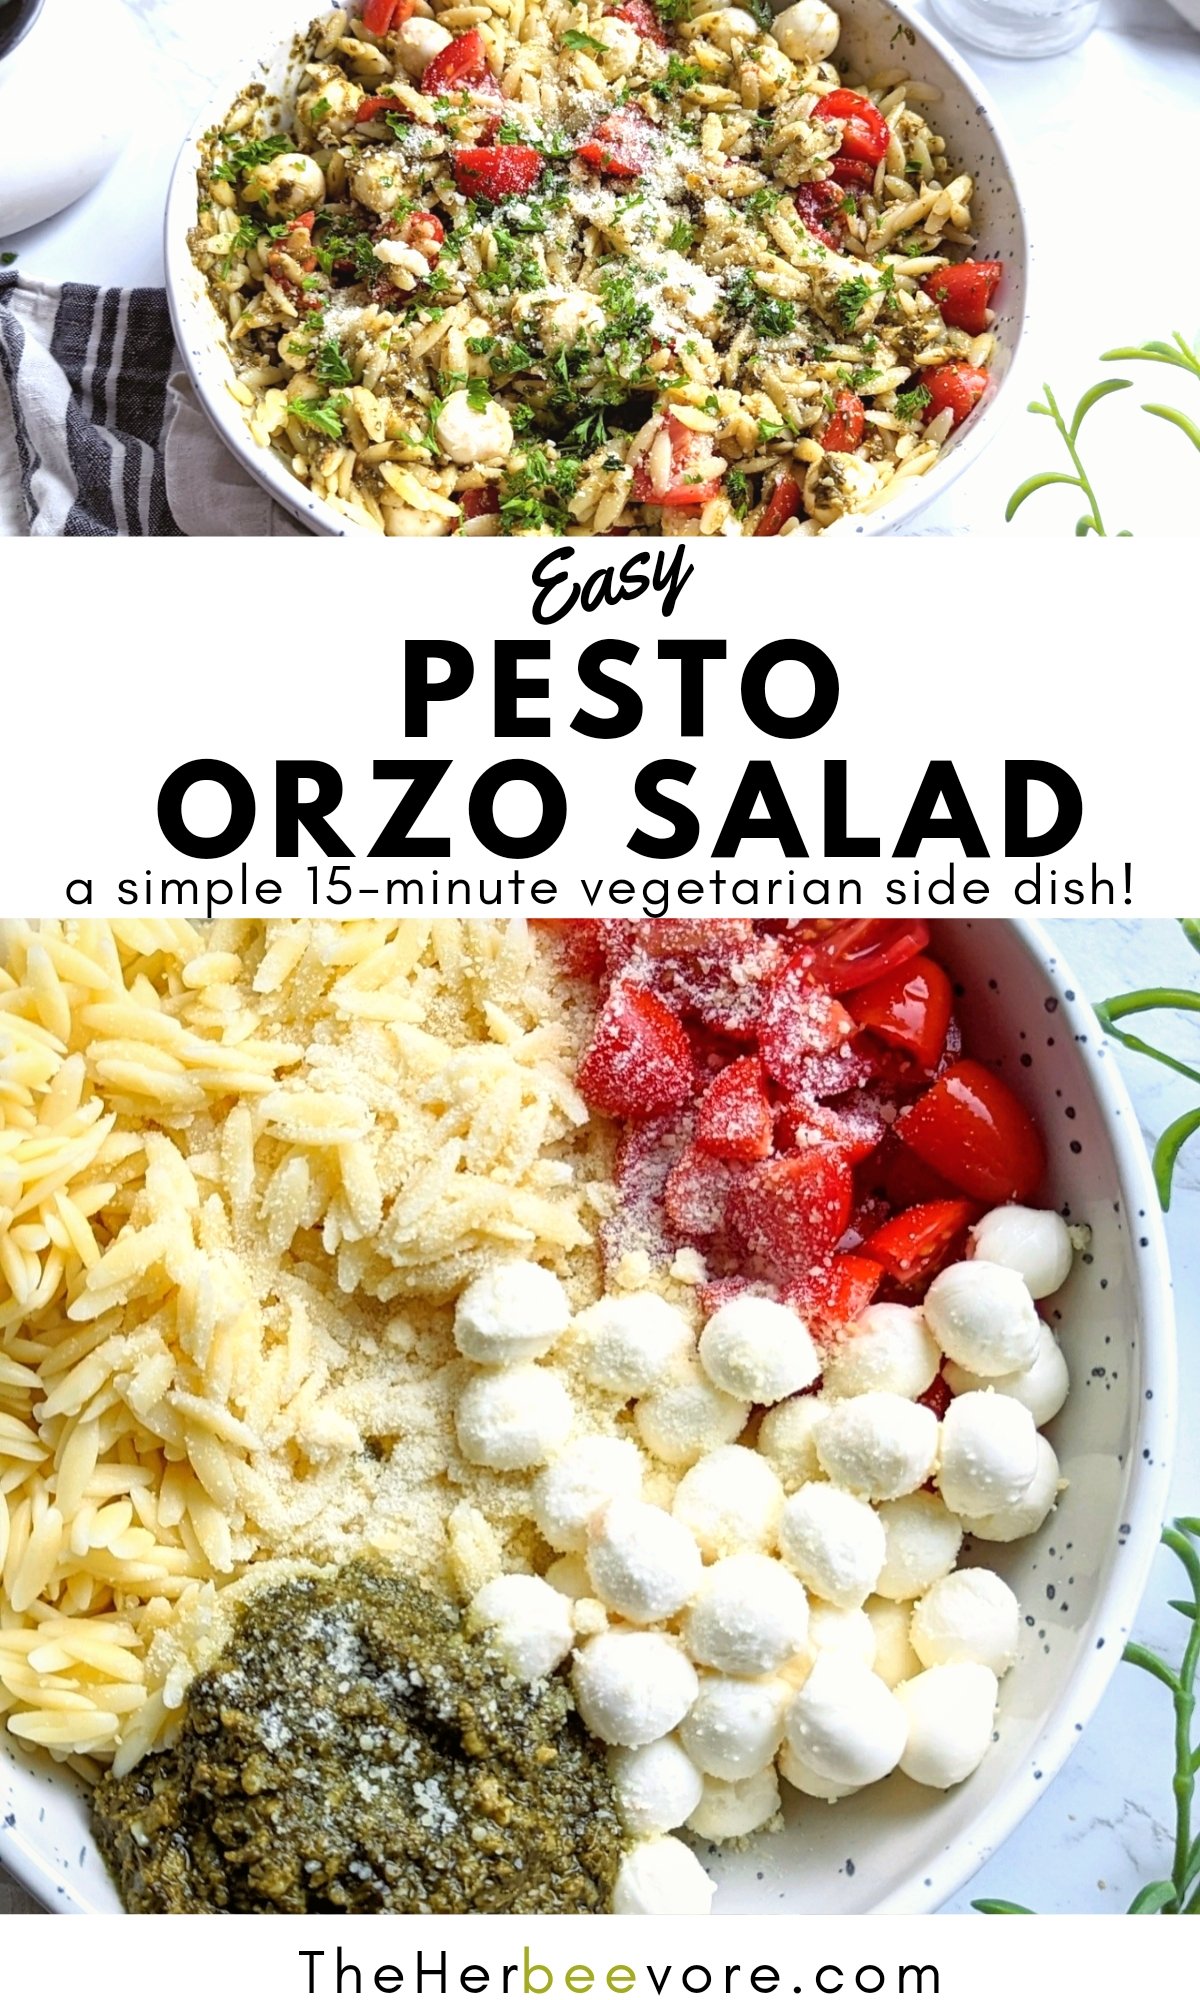 orzo pesto salad recipe healthy pasta salad with pesto dressing vegetarian holiday side dishes for christmas holidays or hannukah